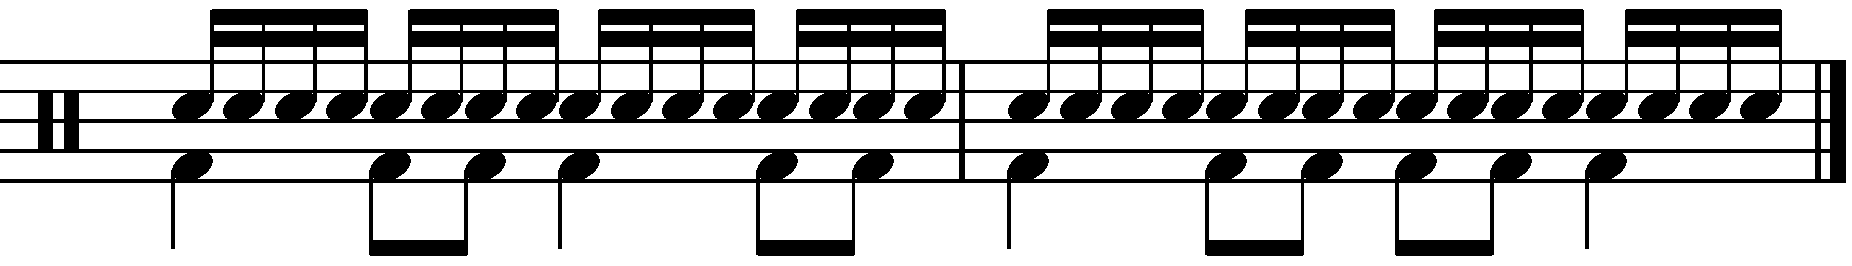 A foot speed exercise using eighth note feet